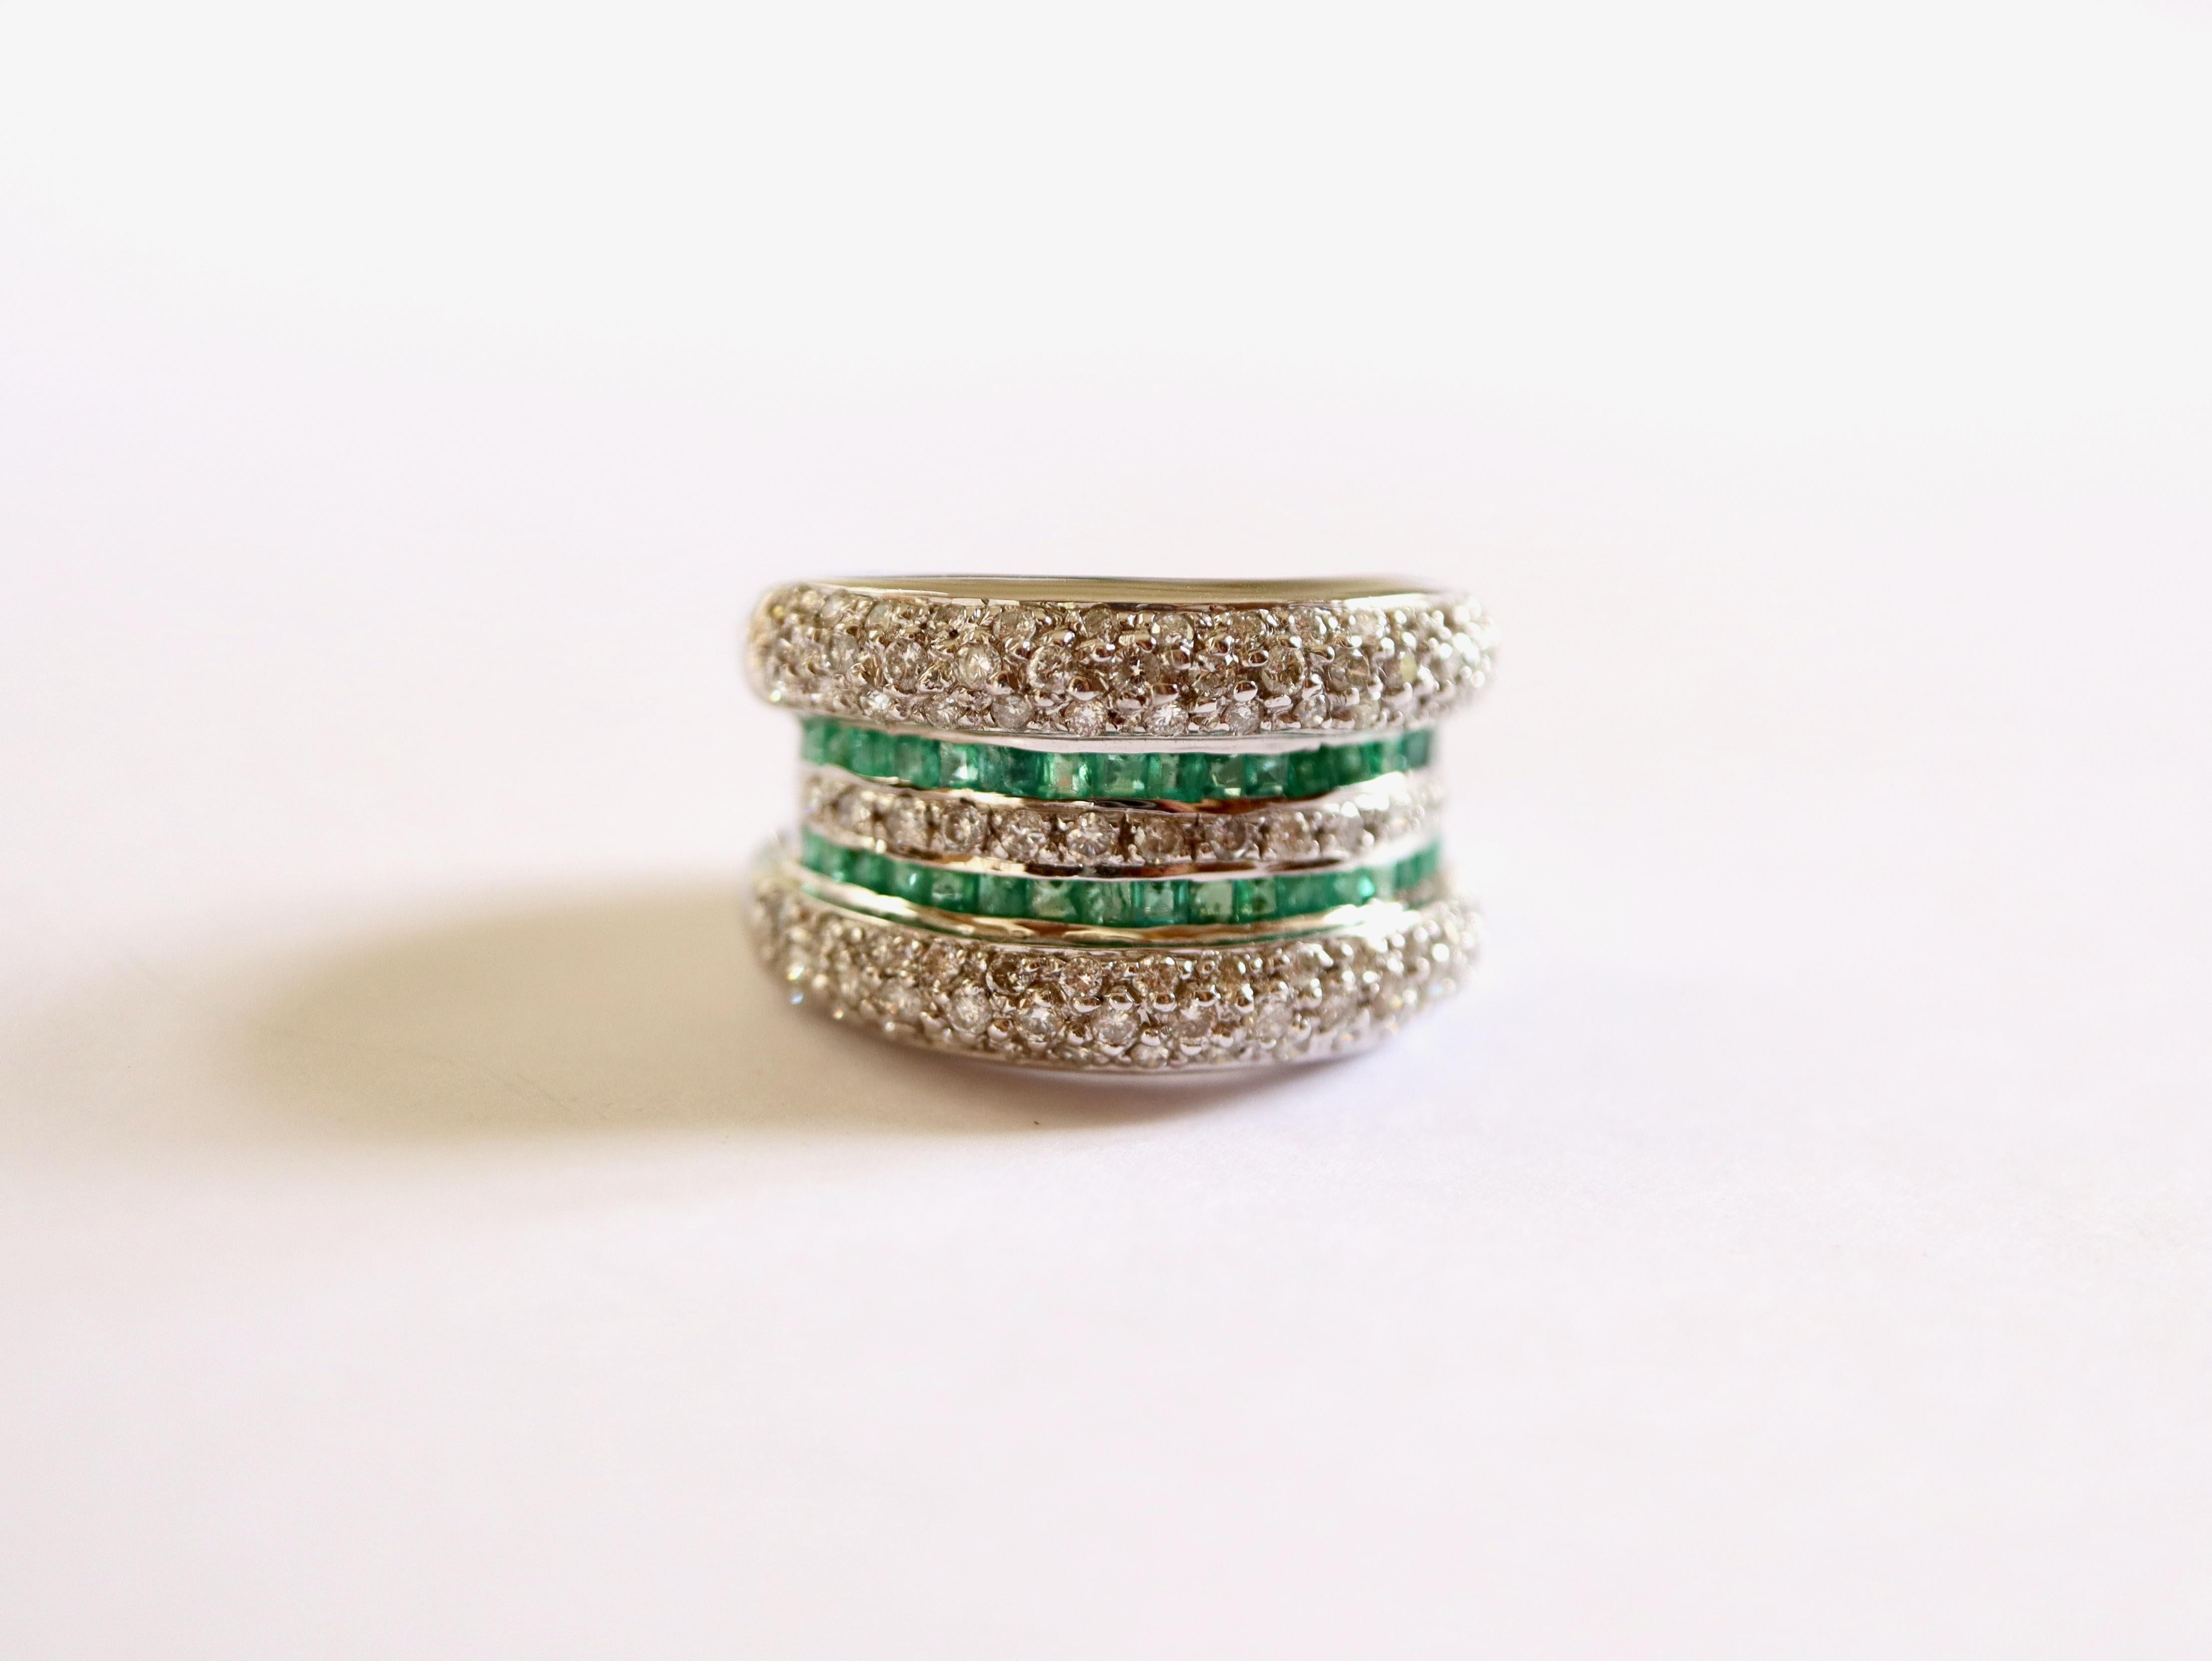 Ring in 18 kt white gold, diamonds and calibrated emeralds. The ring is paved with diamonds for 0.99 carats. There are two rows of calibrated emeralds surrounded by rows of diamonds.
Total Weight of the emeralds: 1.46 carats
Diameter: 16.5 mm